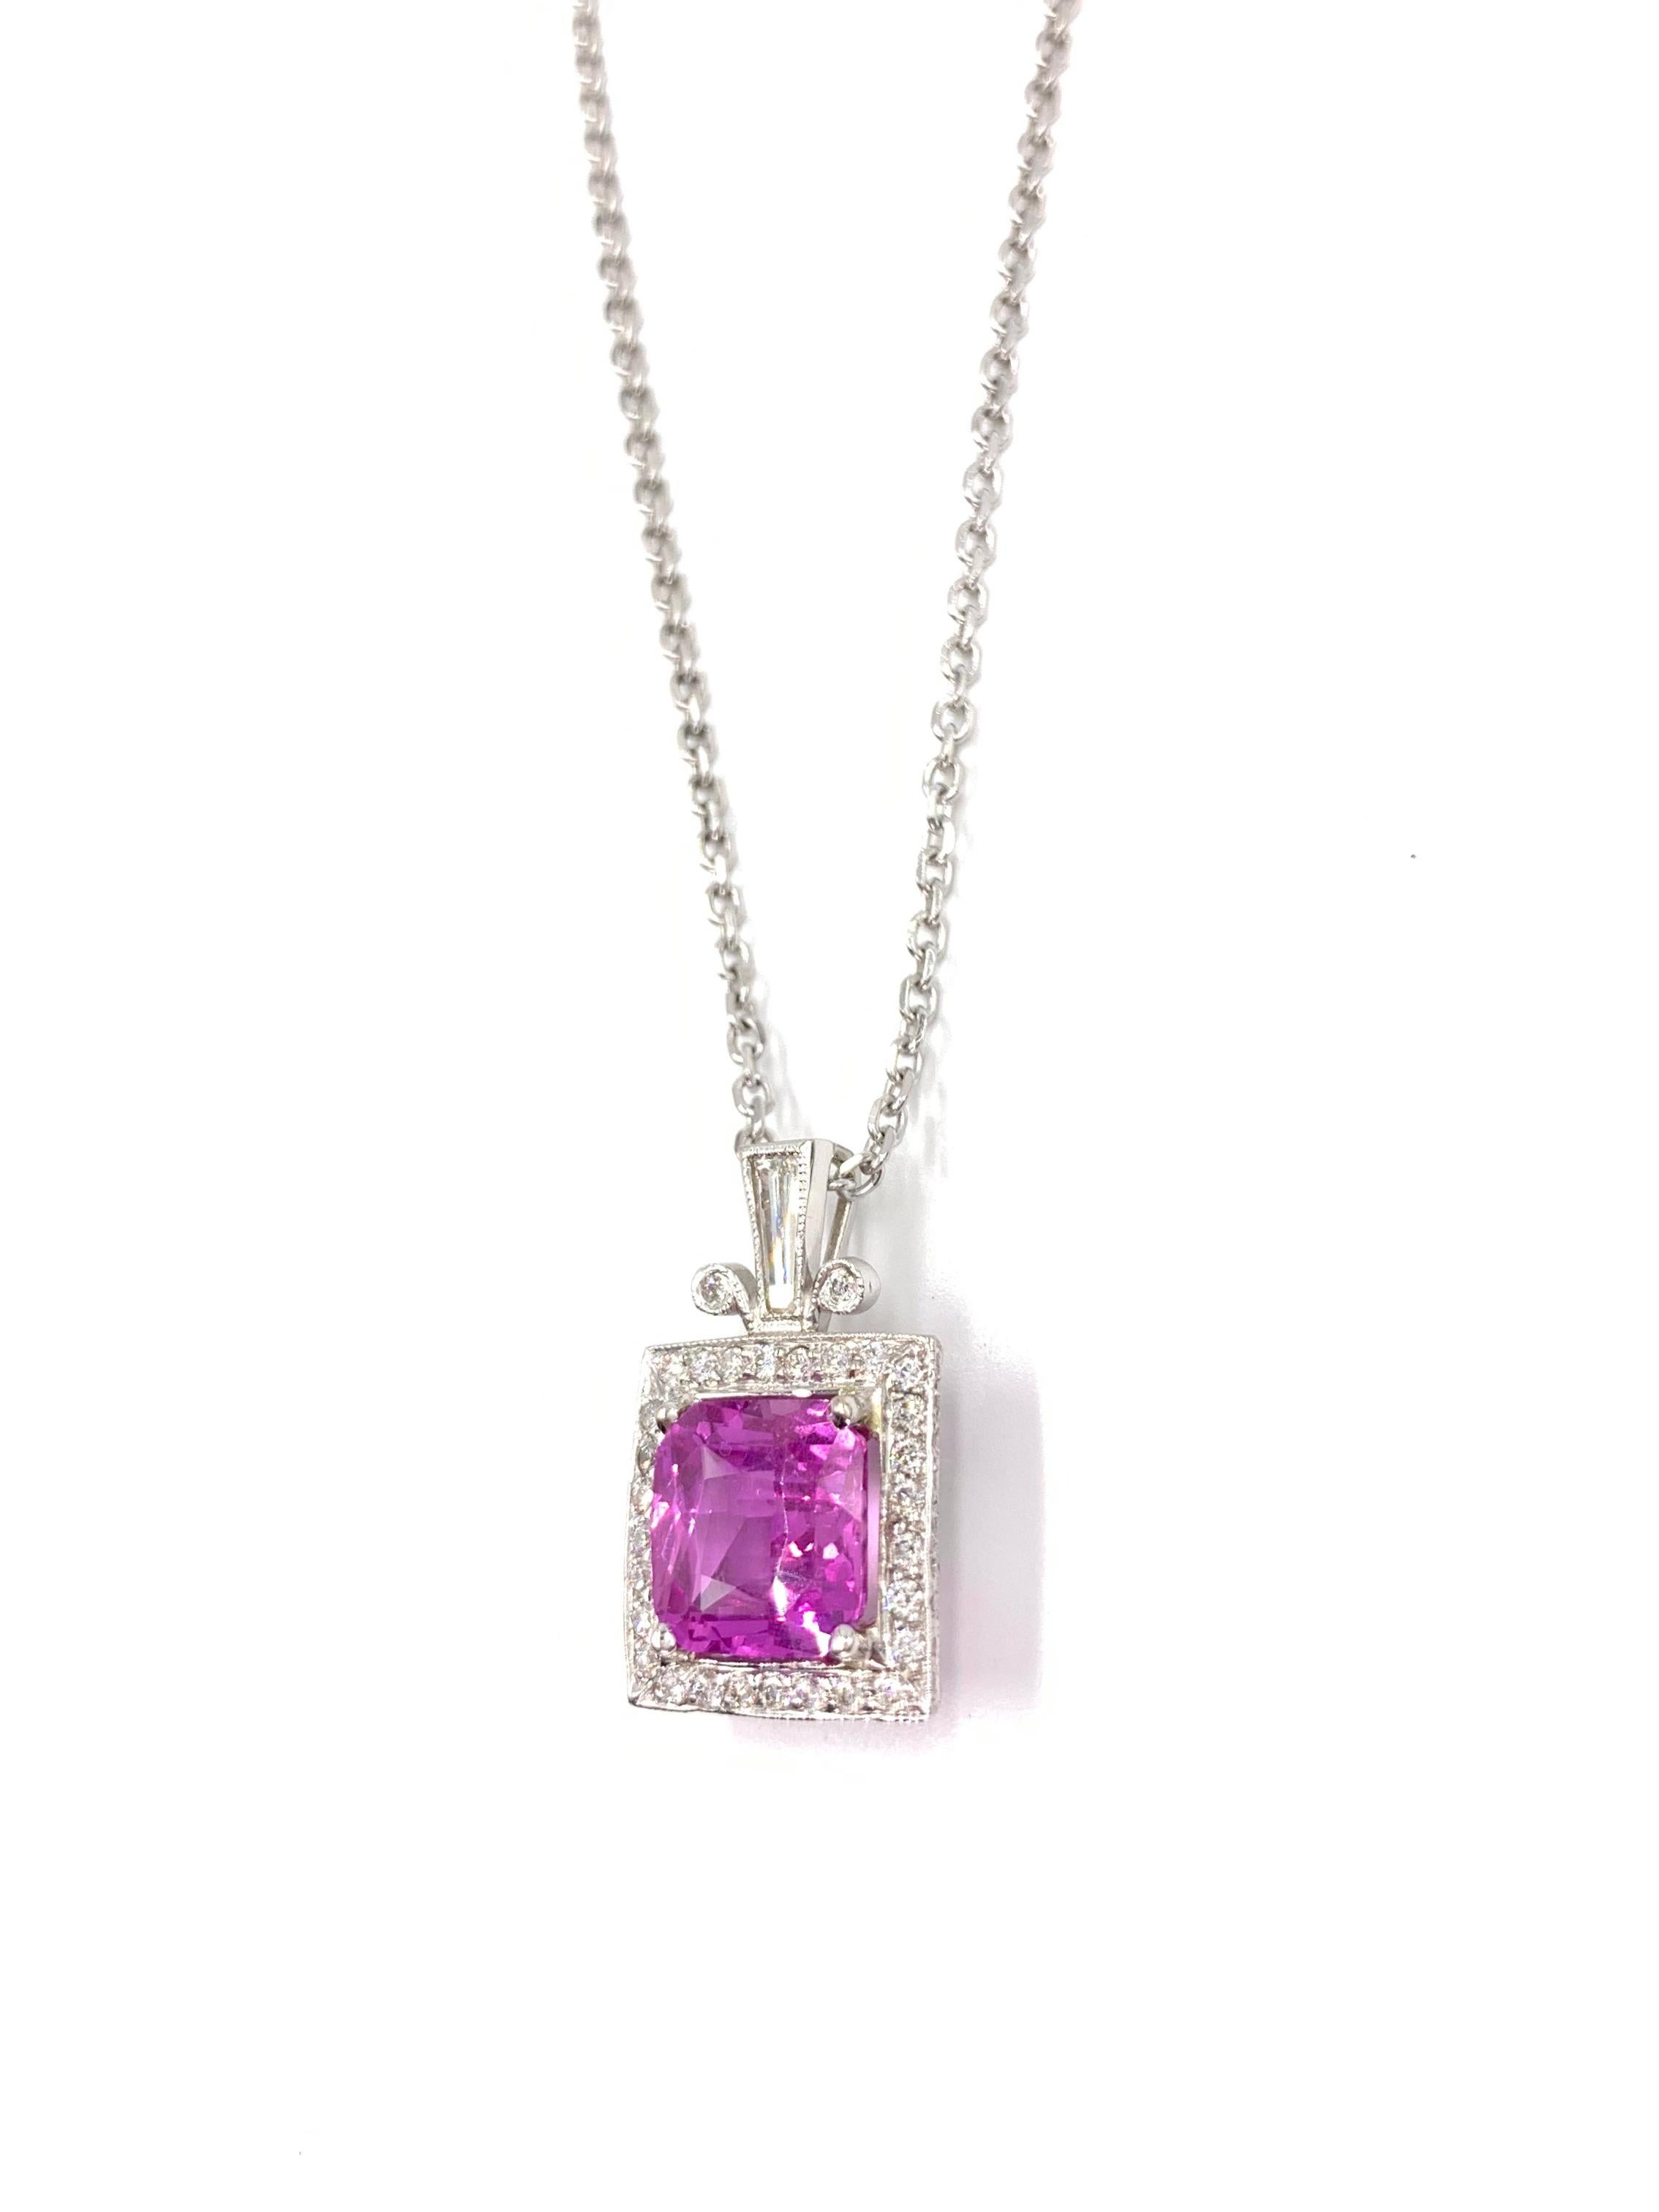 Cushion Cut 4.74 Carat Pink Sapphire and Diamond Pendant Necklace For Sale